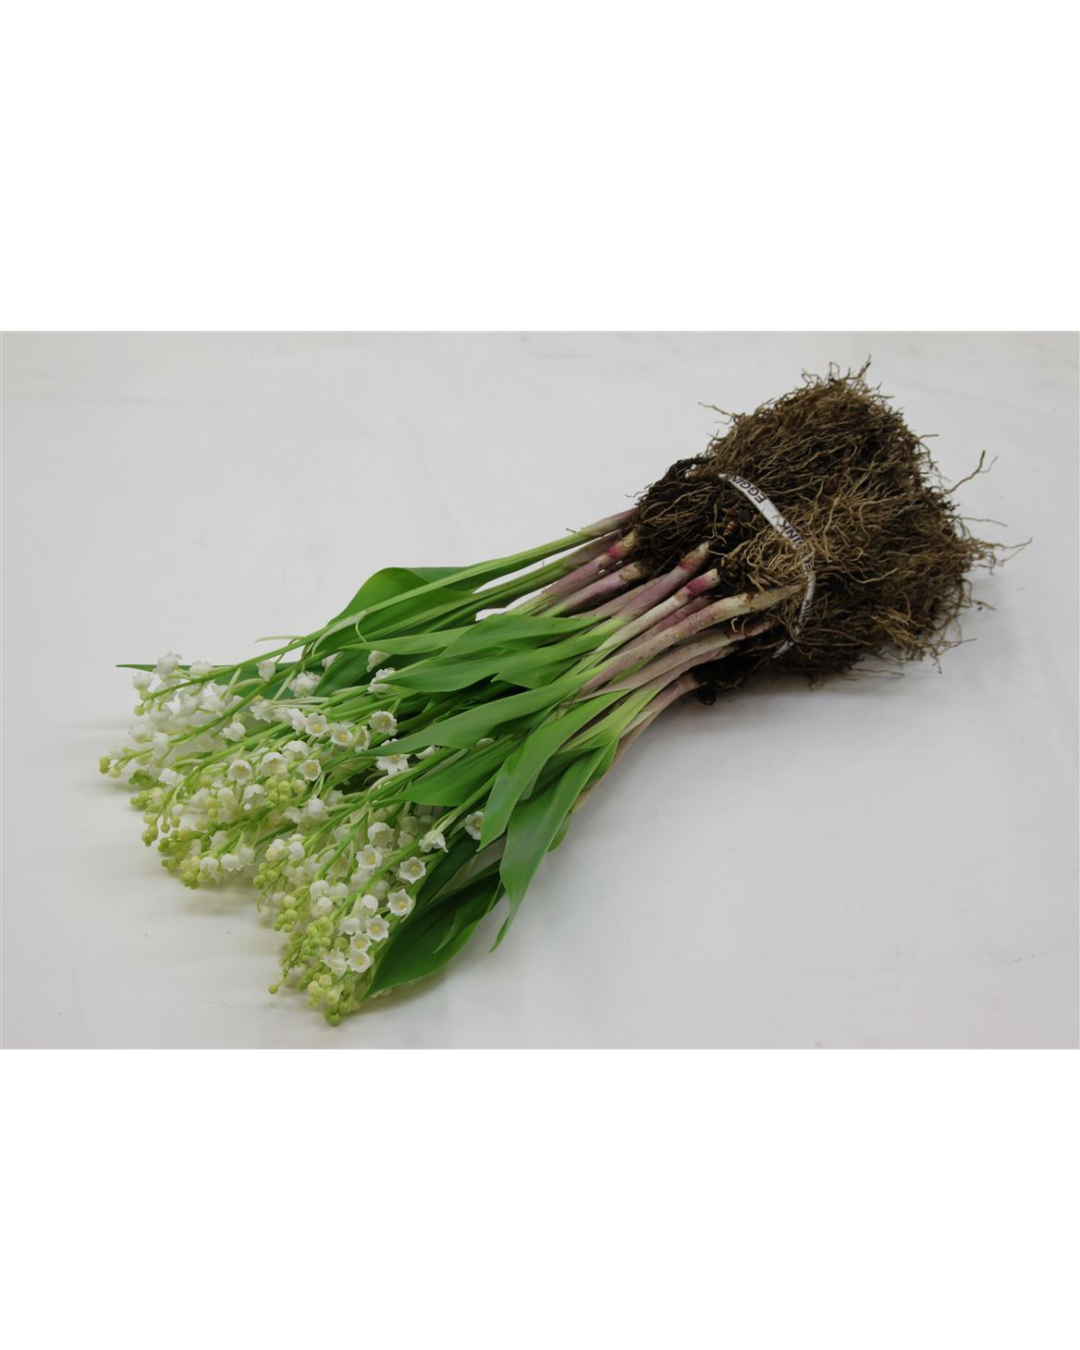 Convallaria Majalus (Lily of the valley)